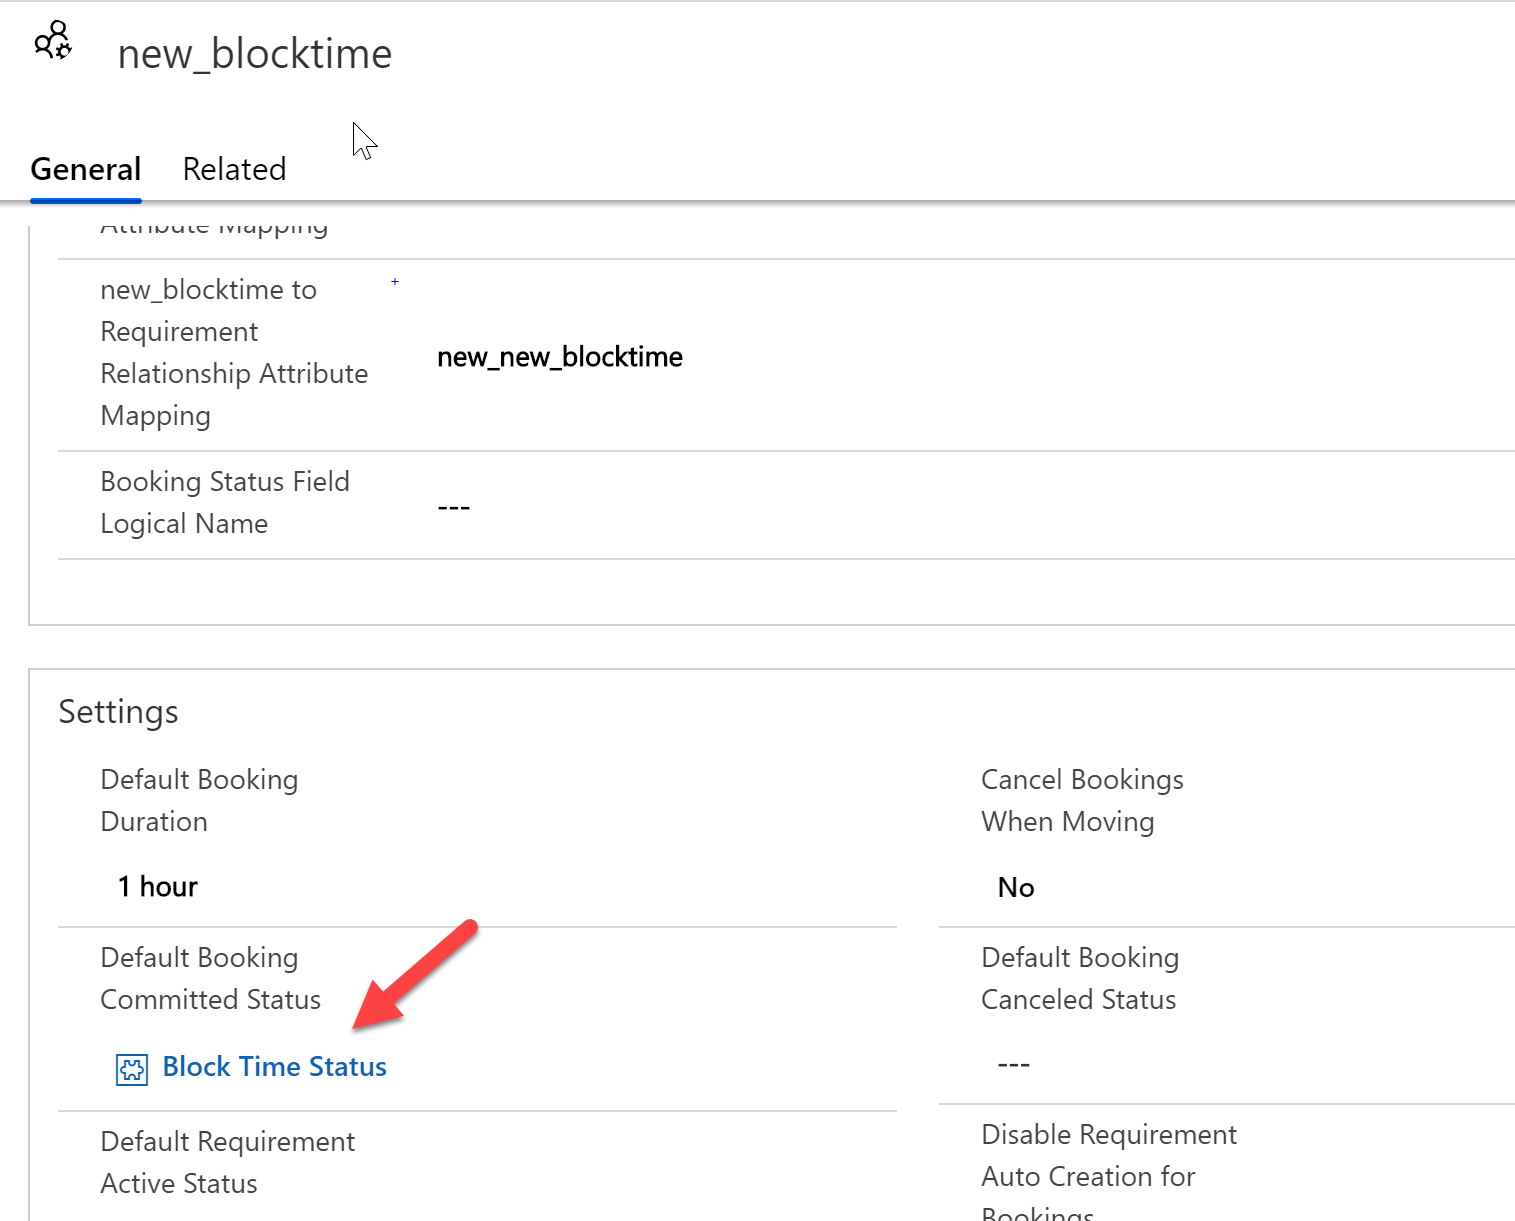 Changing the default booking status on the booking setup metadata record to the "block time status"